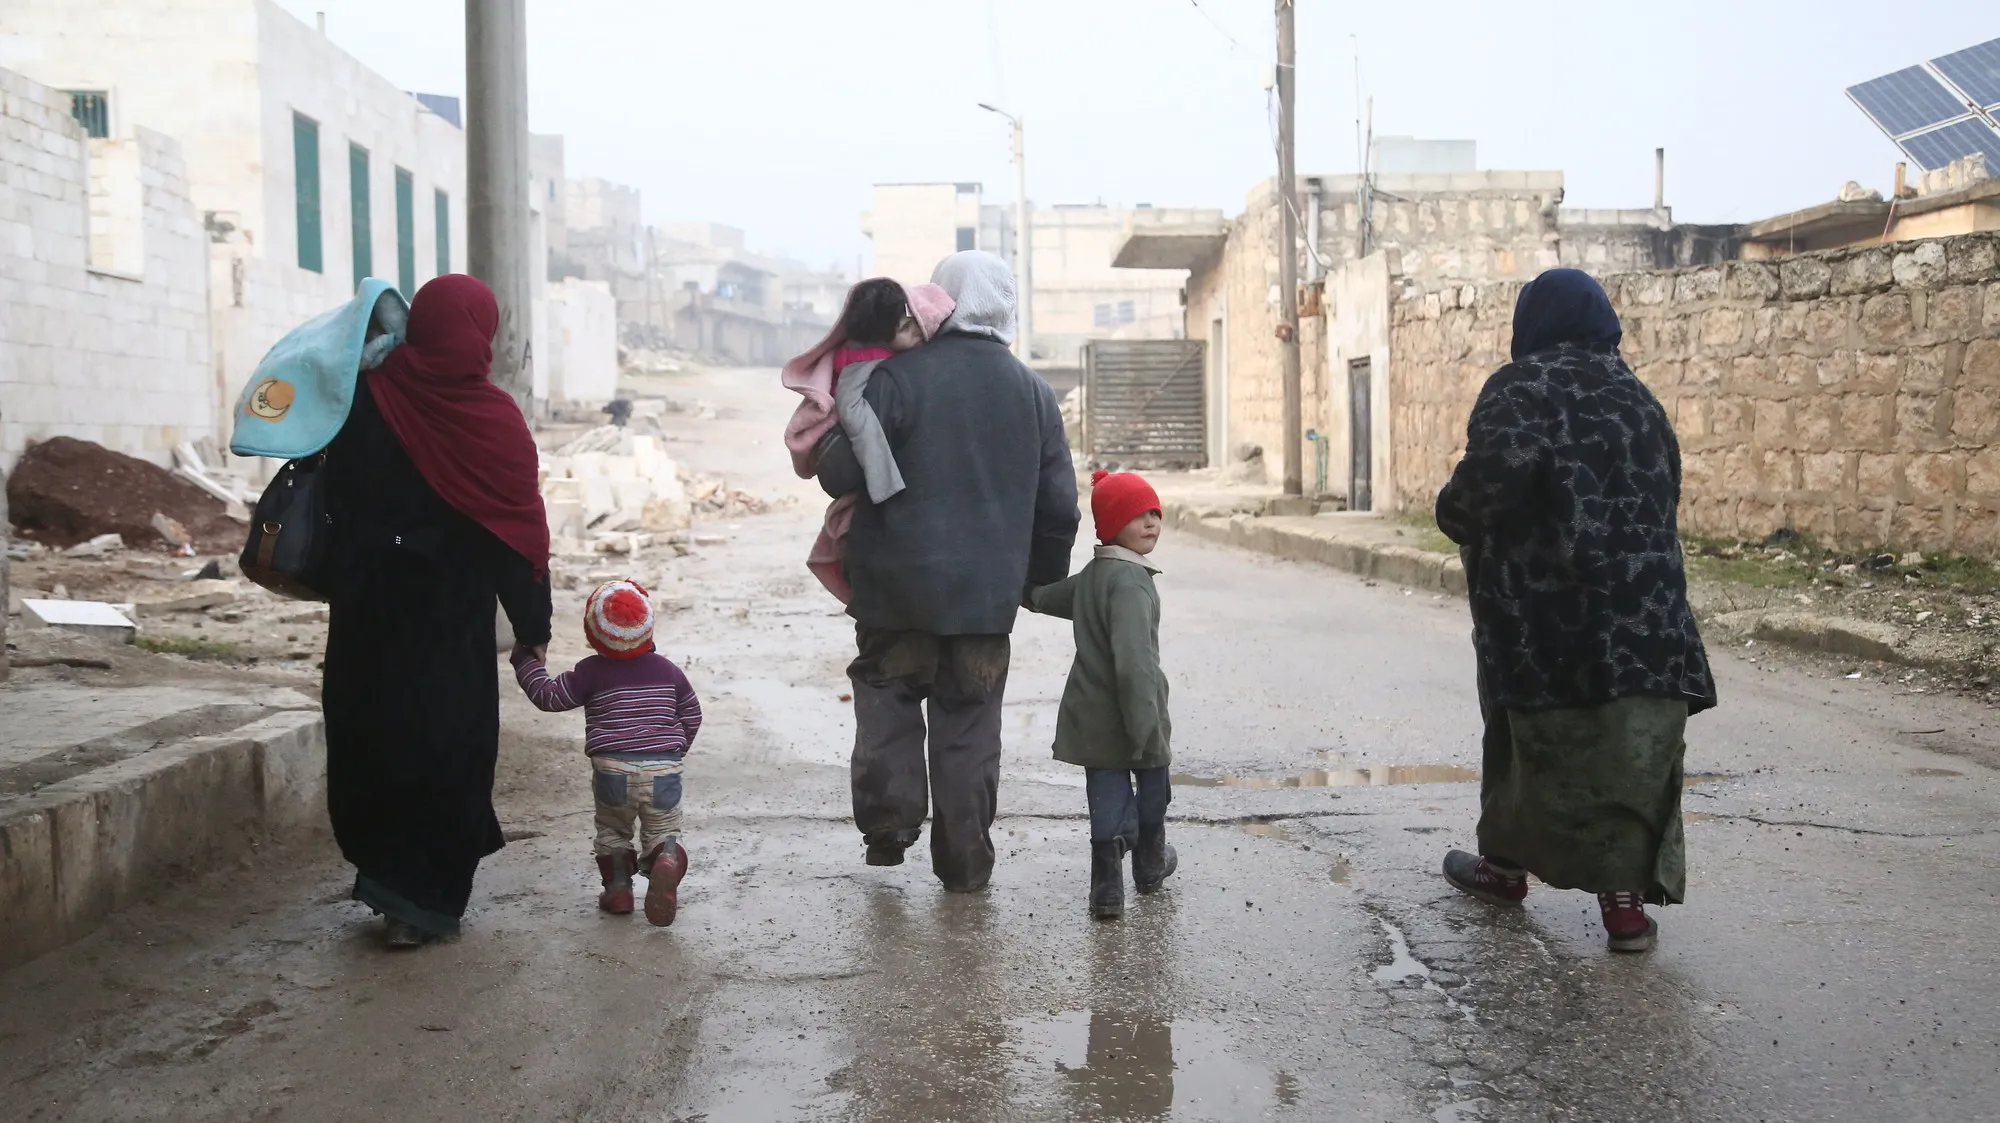 A group of children and adults walk in winter clothes in a bombed out city.